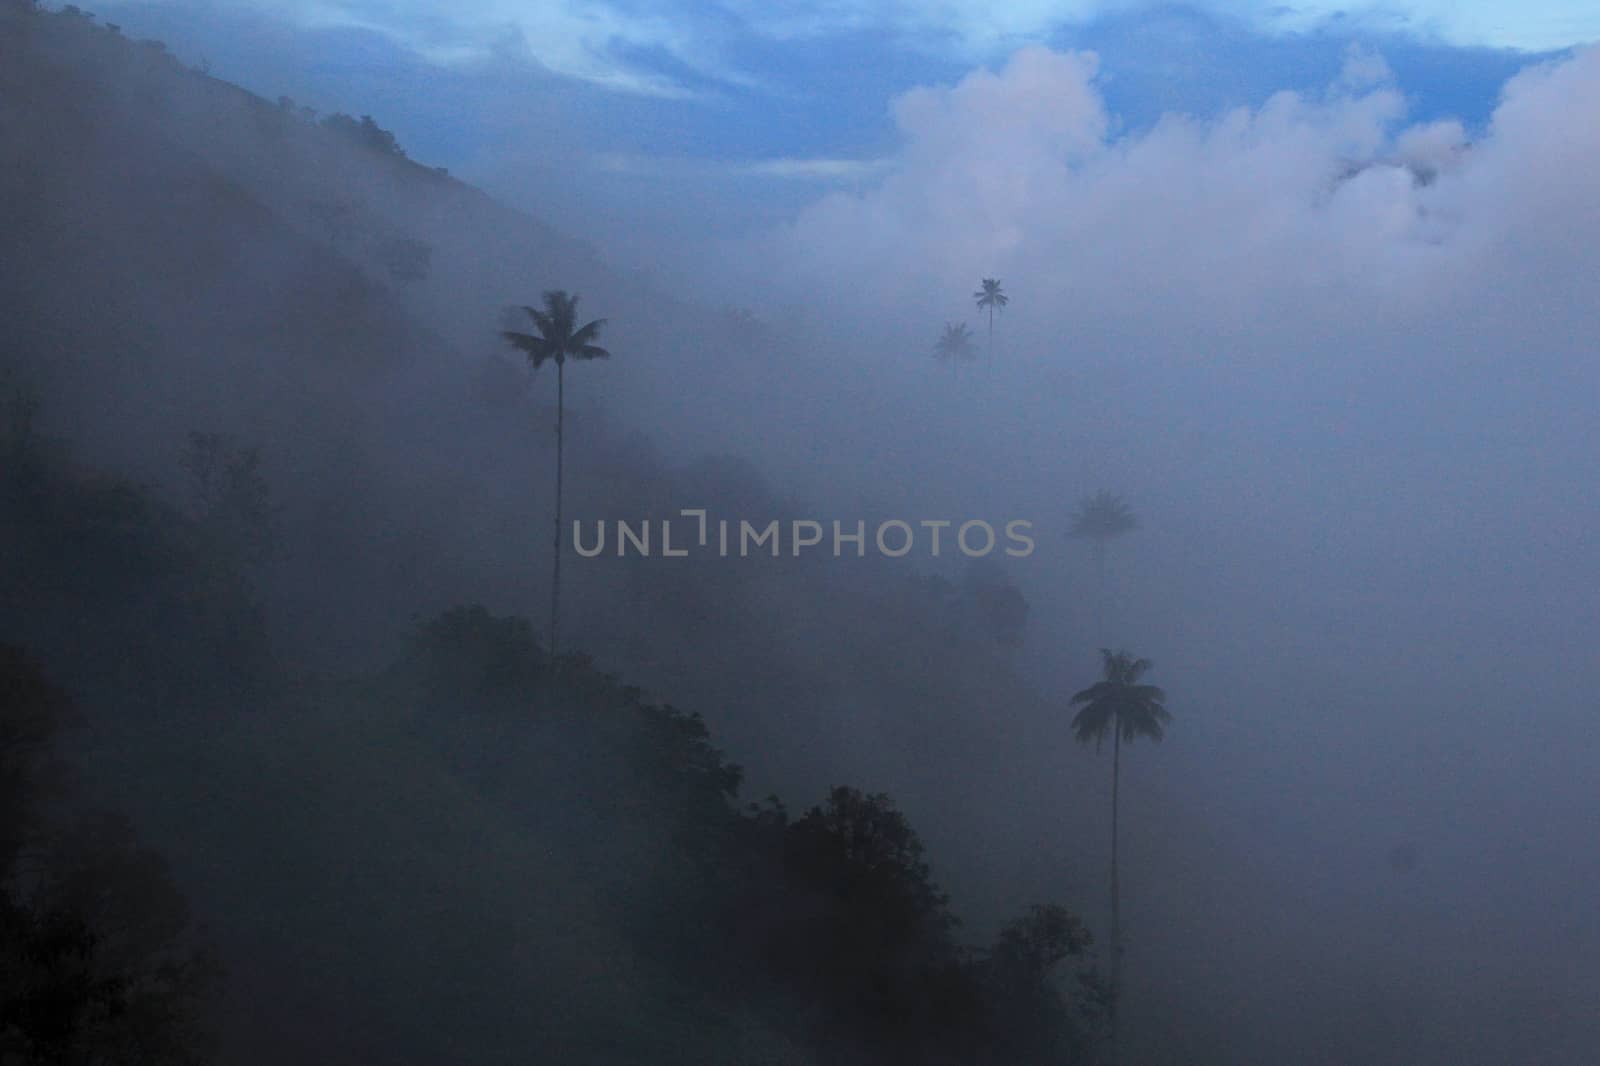 Wax palm trees in Cocora Valley, Salento, Toche, Colombia, South America, cloudy fog